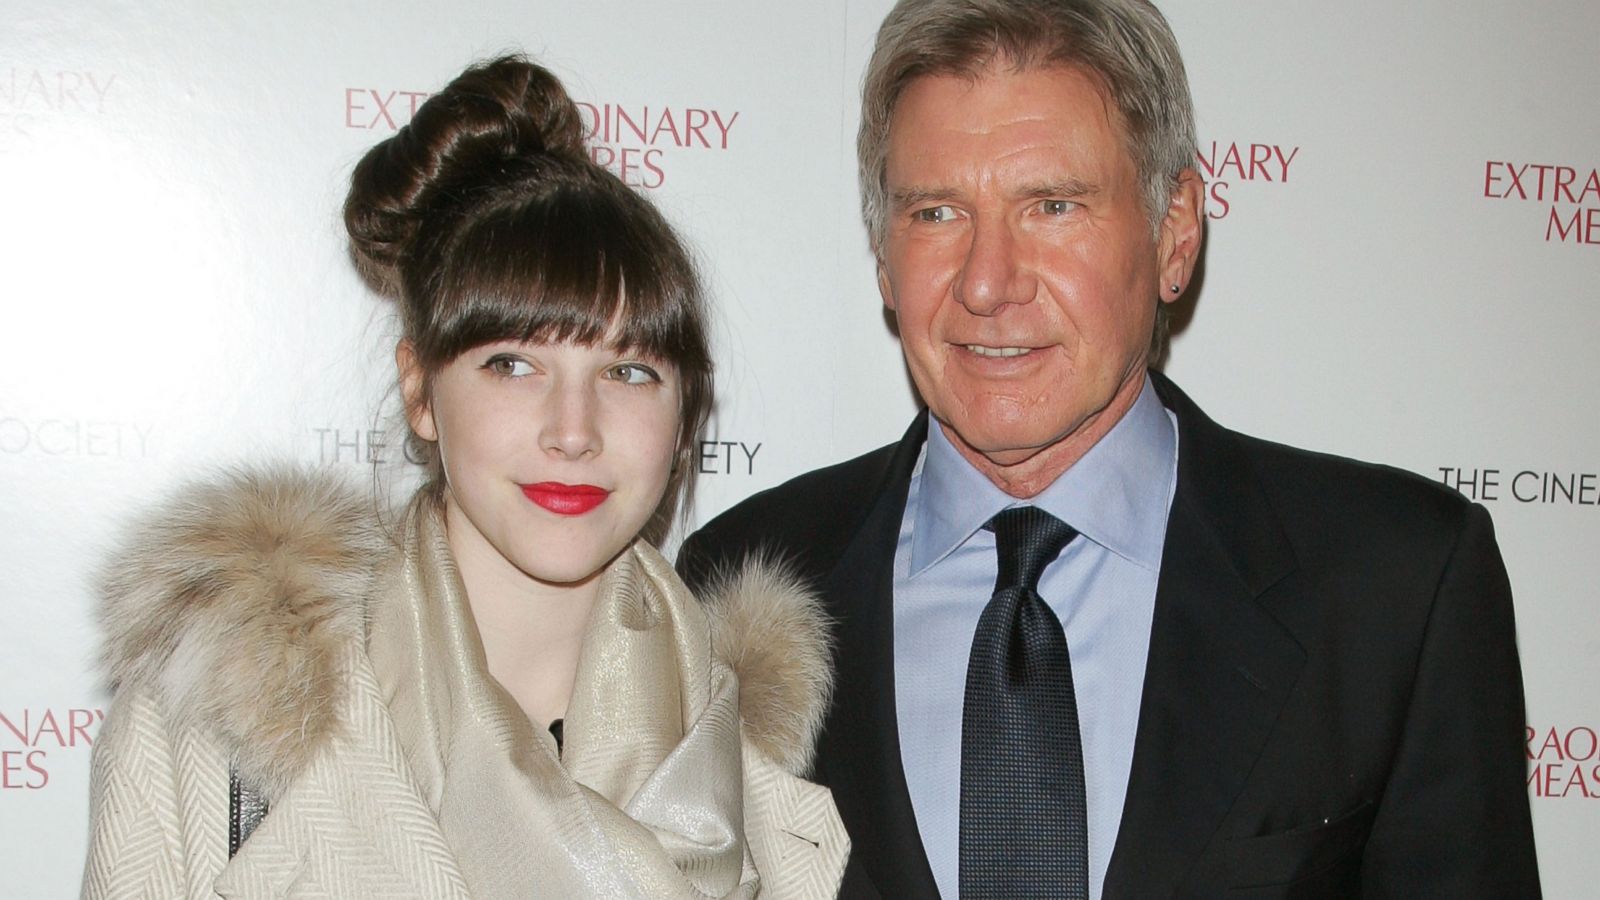 Georgia Ford Bio: All about the Only Daughter of Harrison Ford’s Family